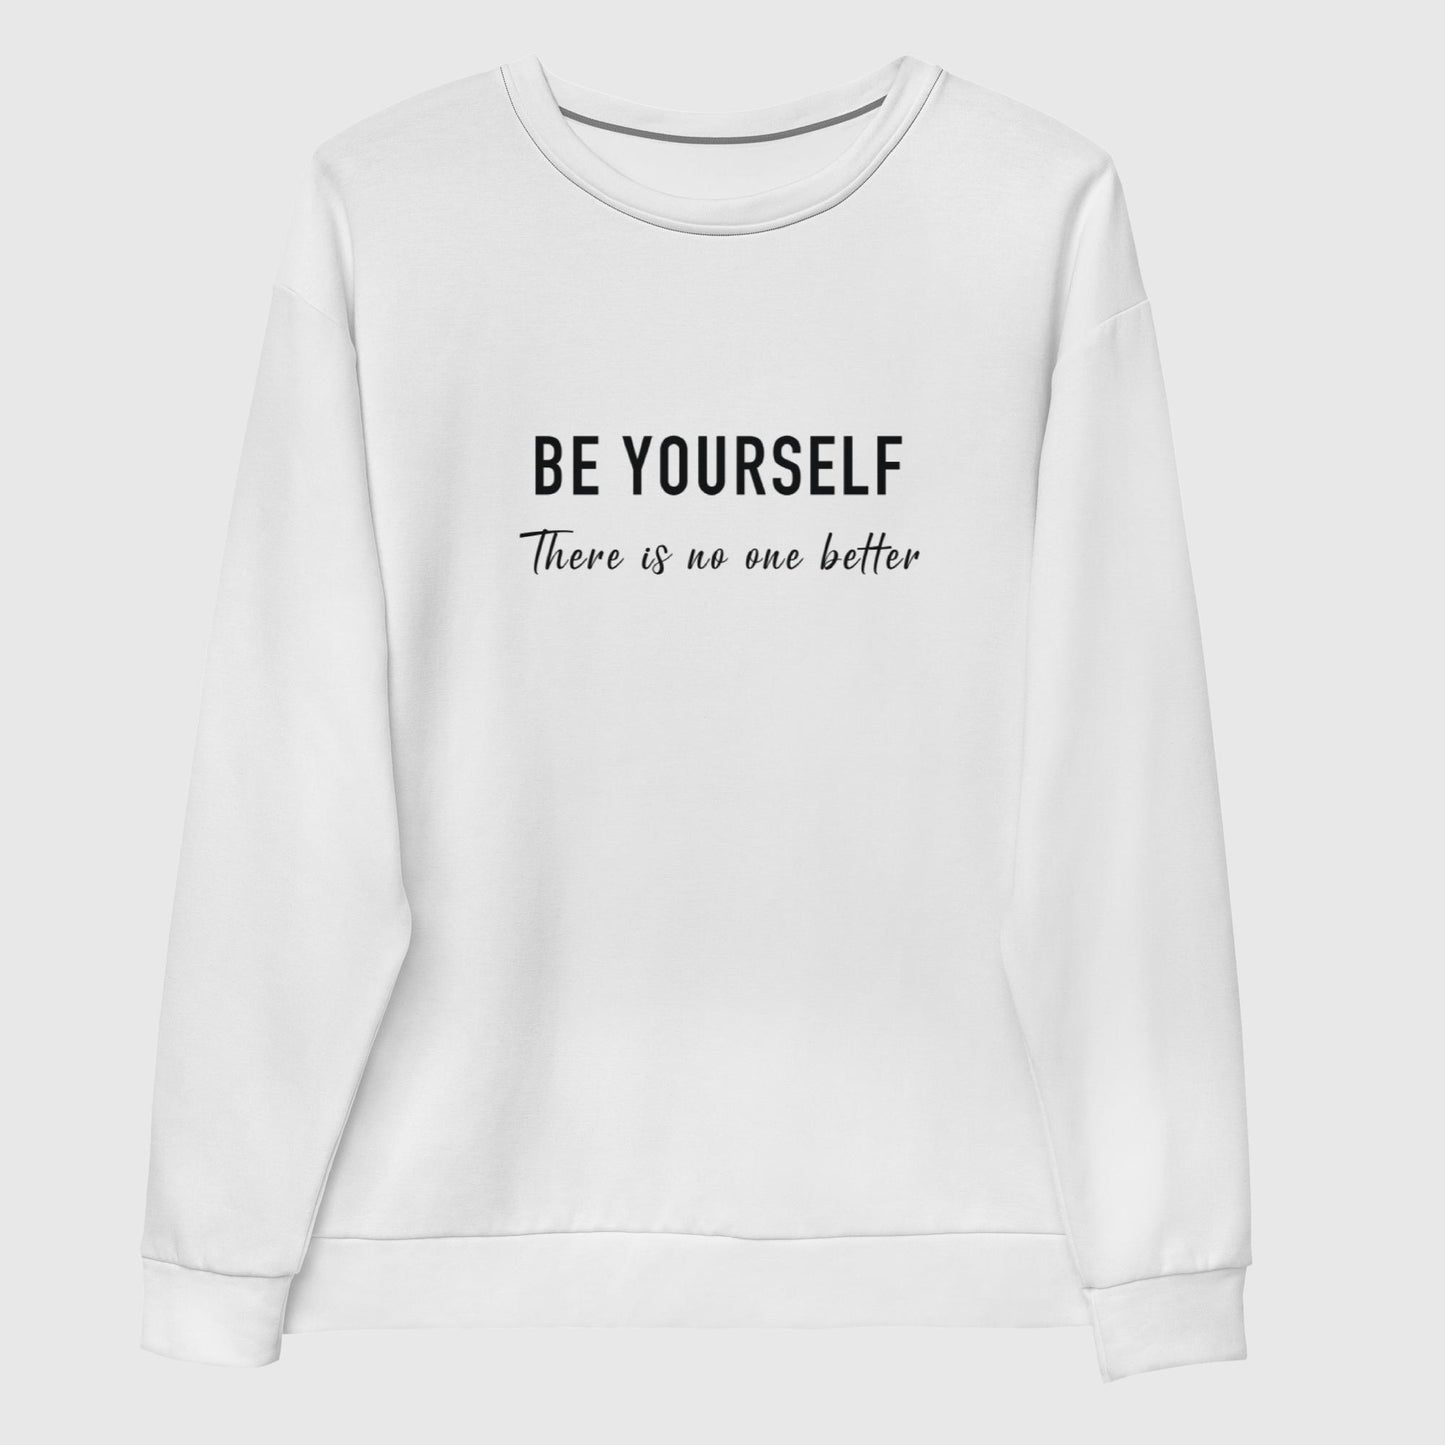 Recycled sweatshirt that features Taylor Swift's inspirational quote, "Just be yourself, there is no one better."